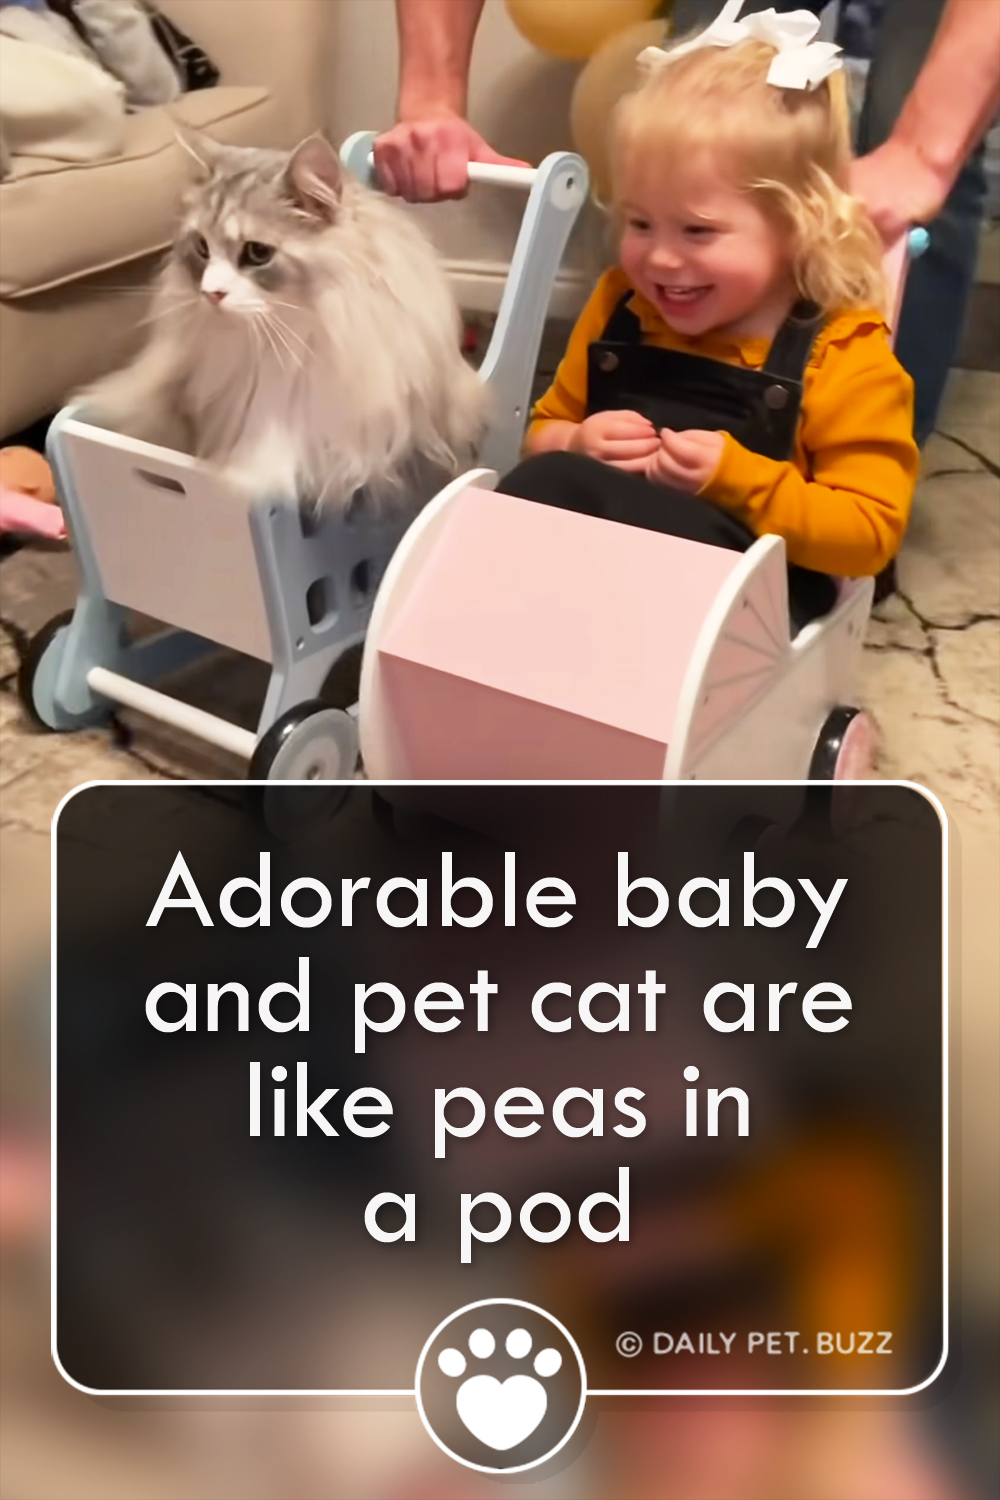 Adorable baby and pet cat are like peas in a pod